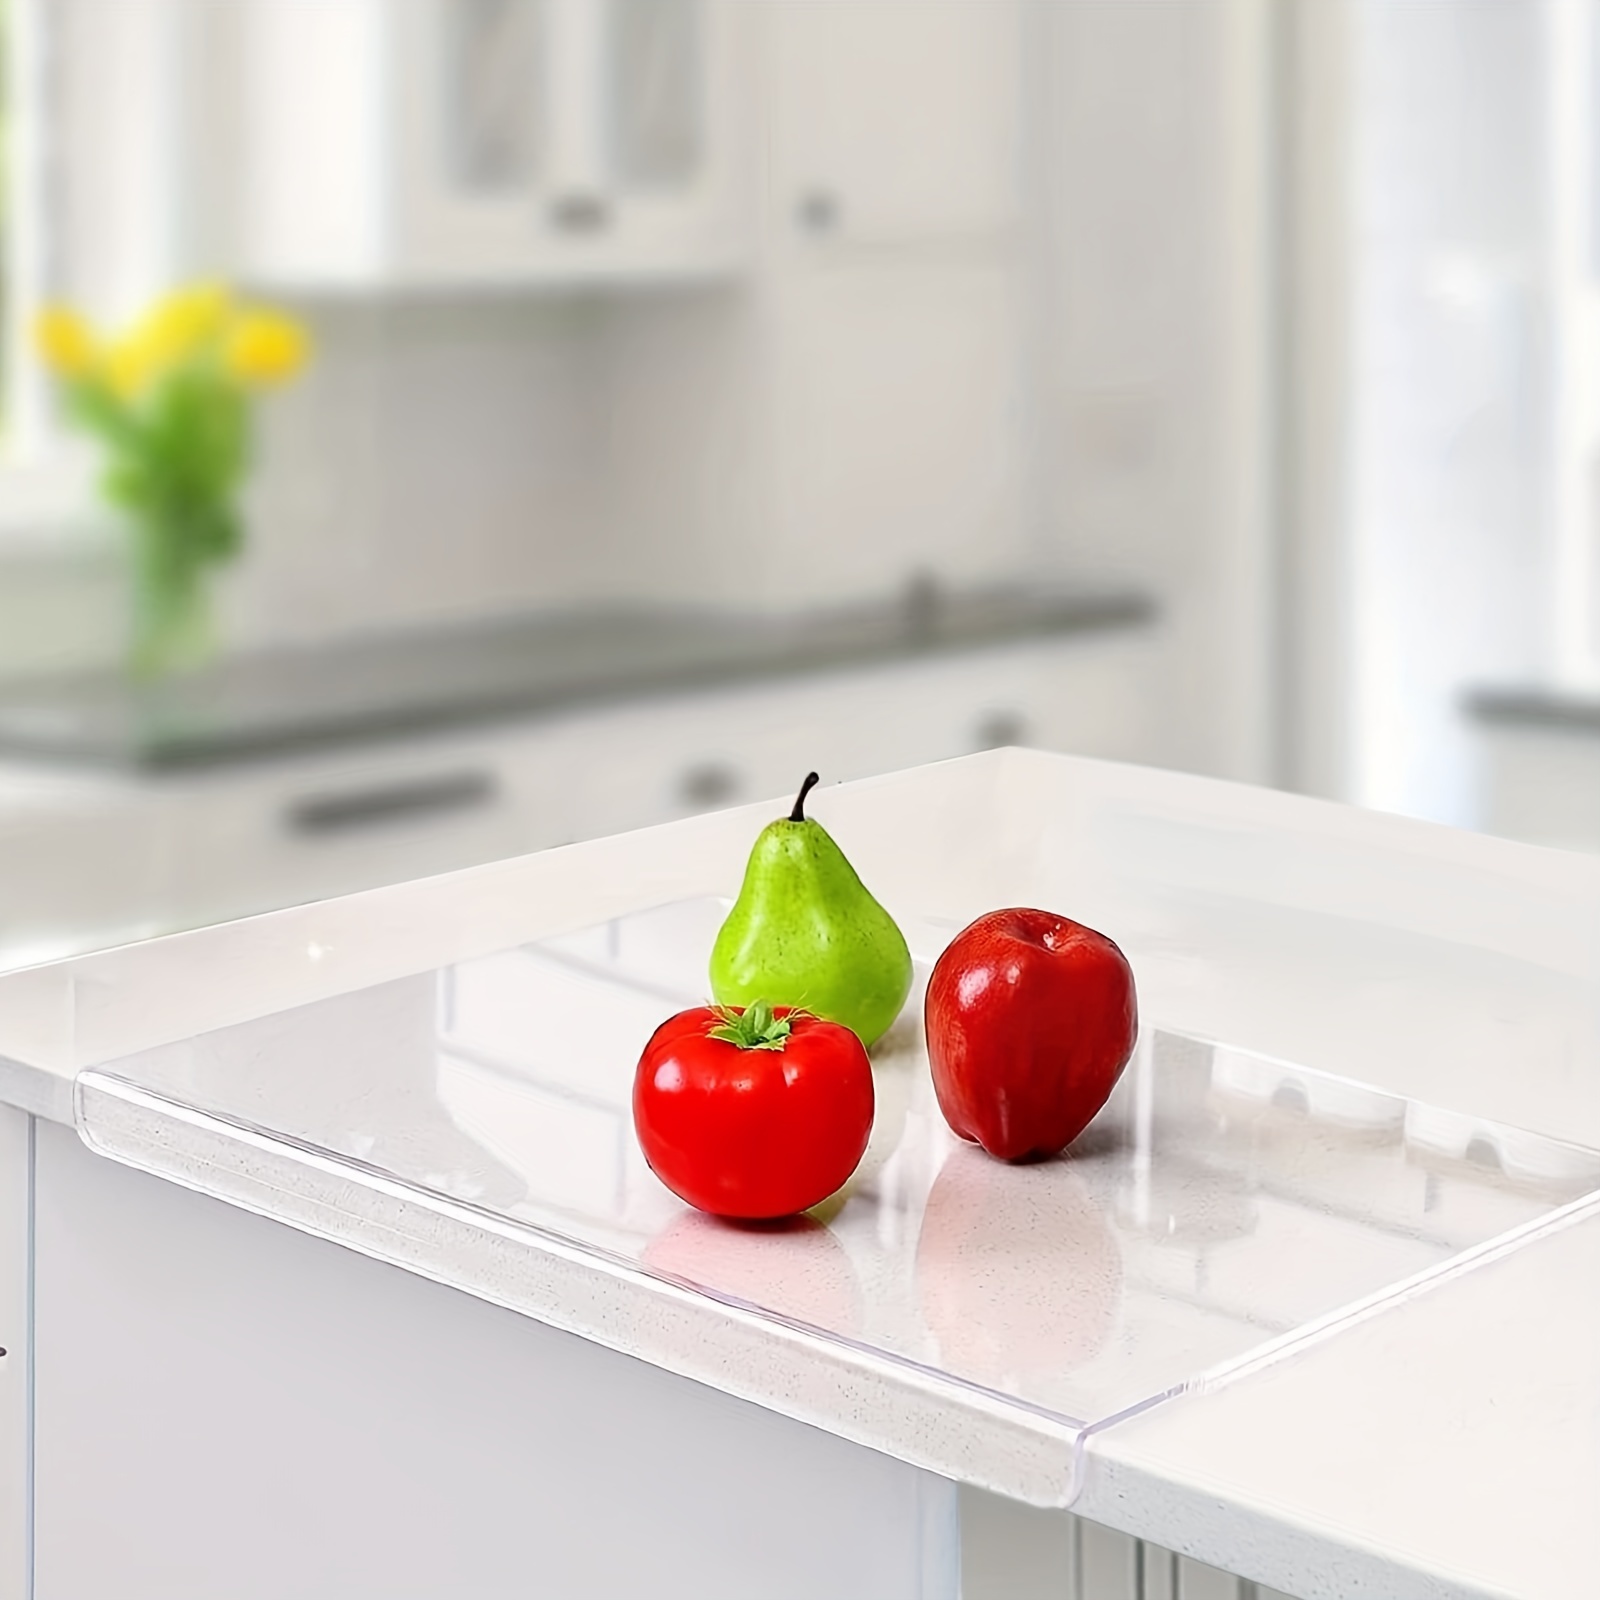 Acrylic Cutting Boards With Lip for Kitchen Counter Protector Home